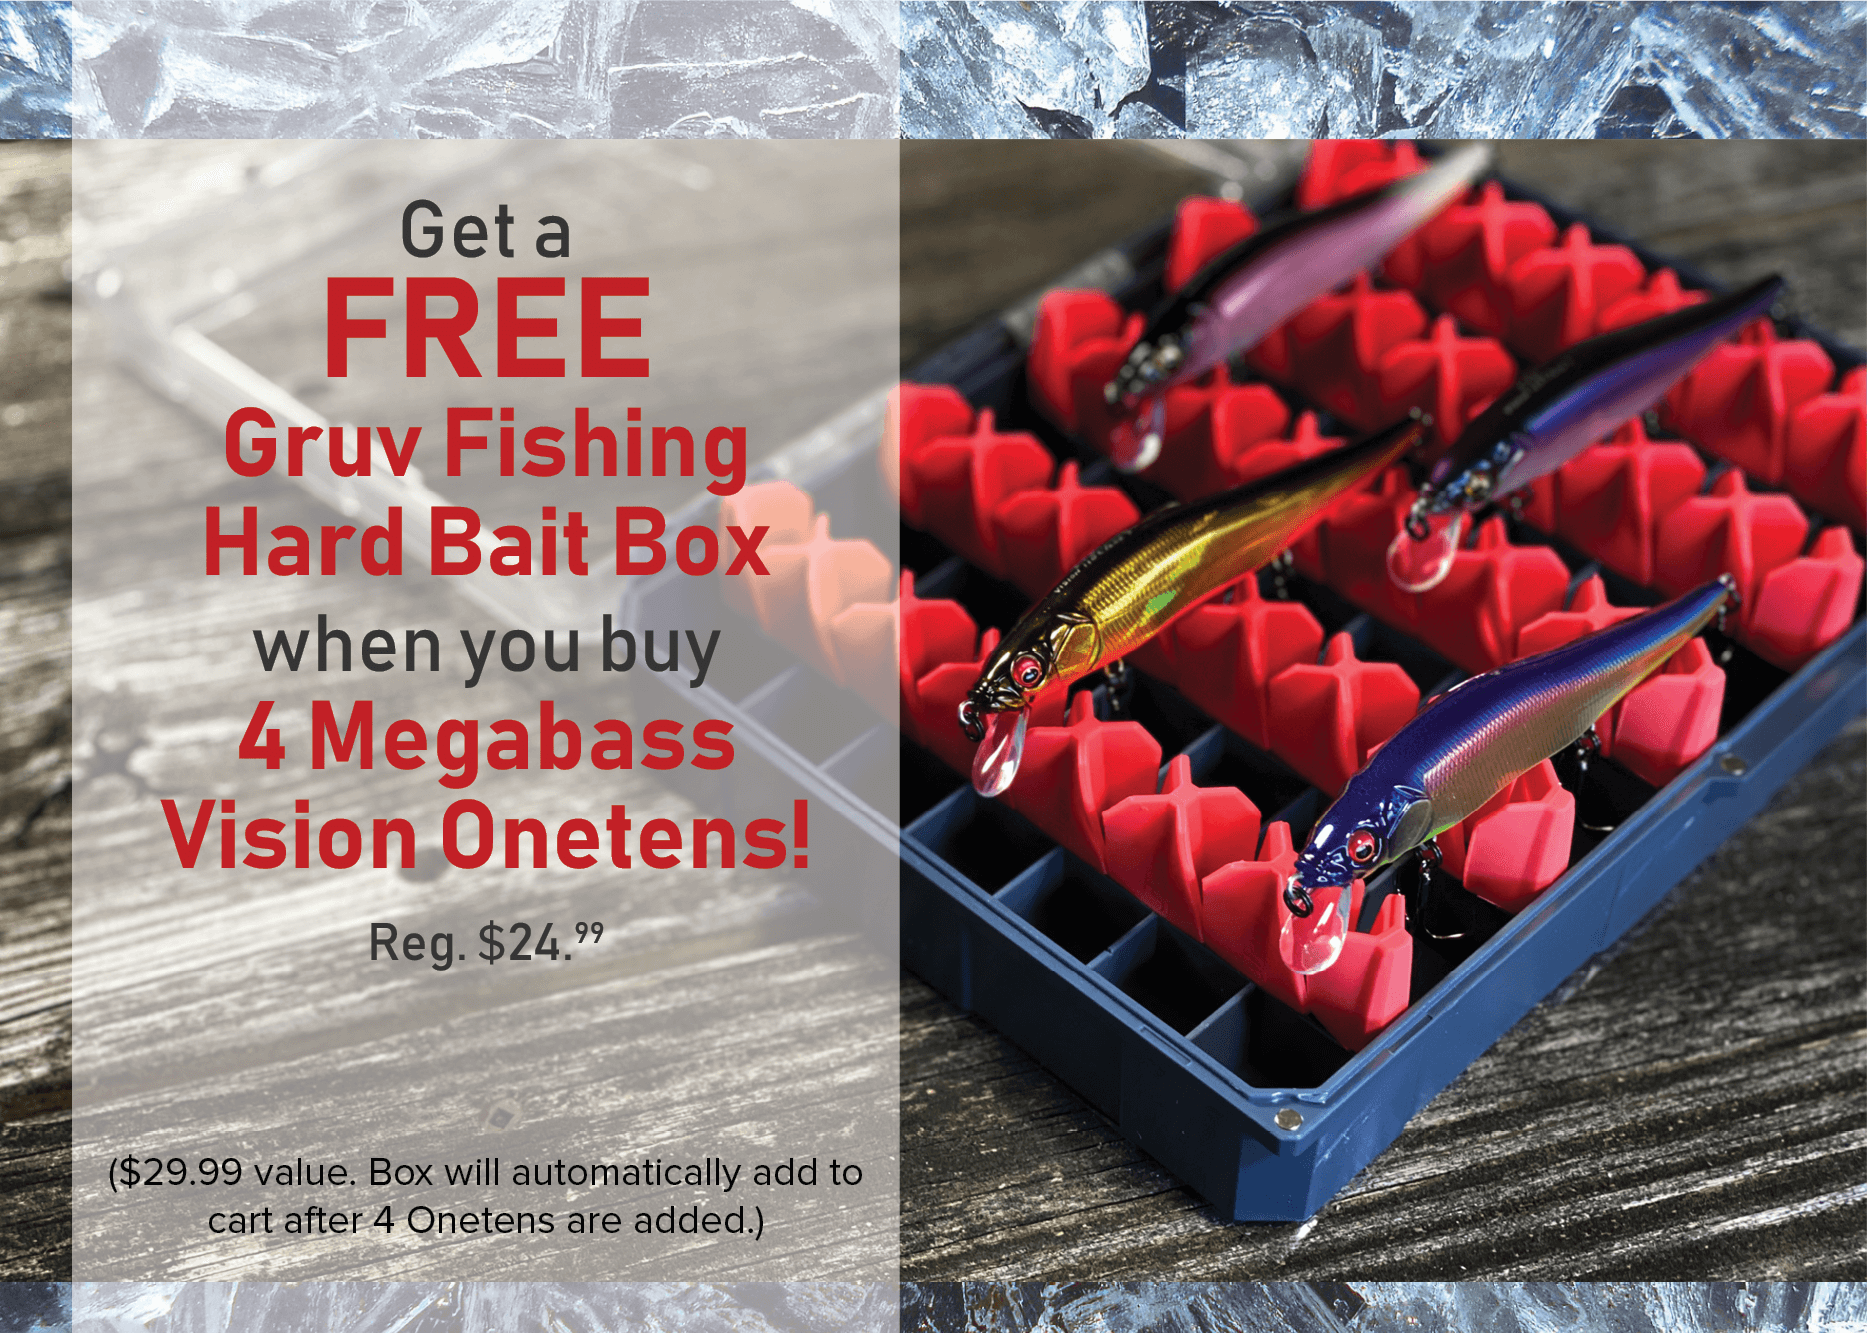 Get a FREE Gruv Fishing Hard Bait Box when you buy 4 Megabass Vision Onetens. 